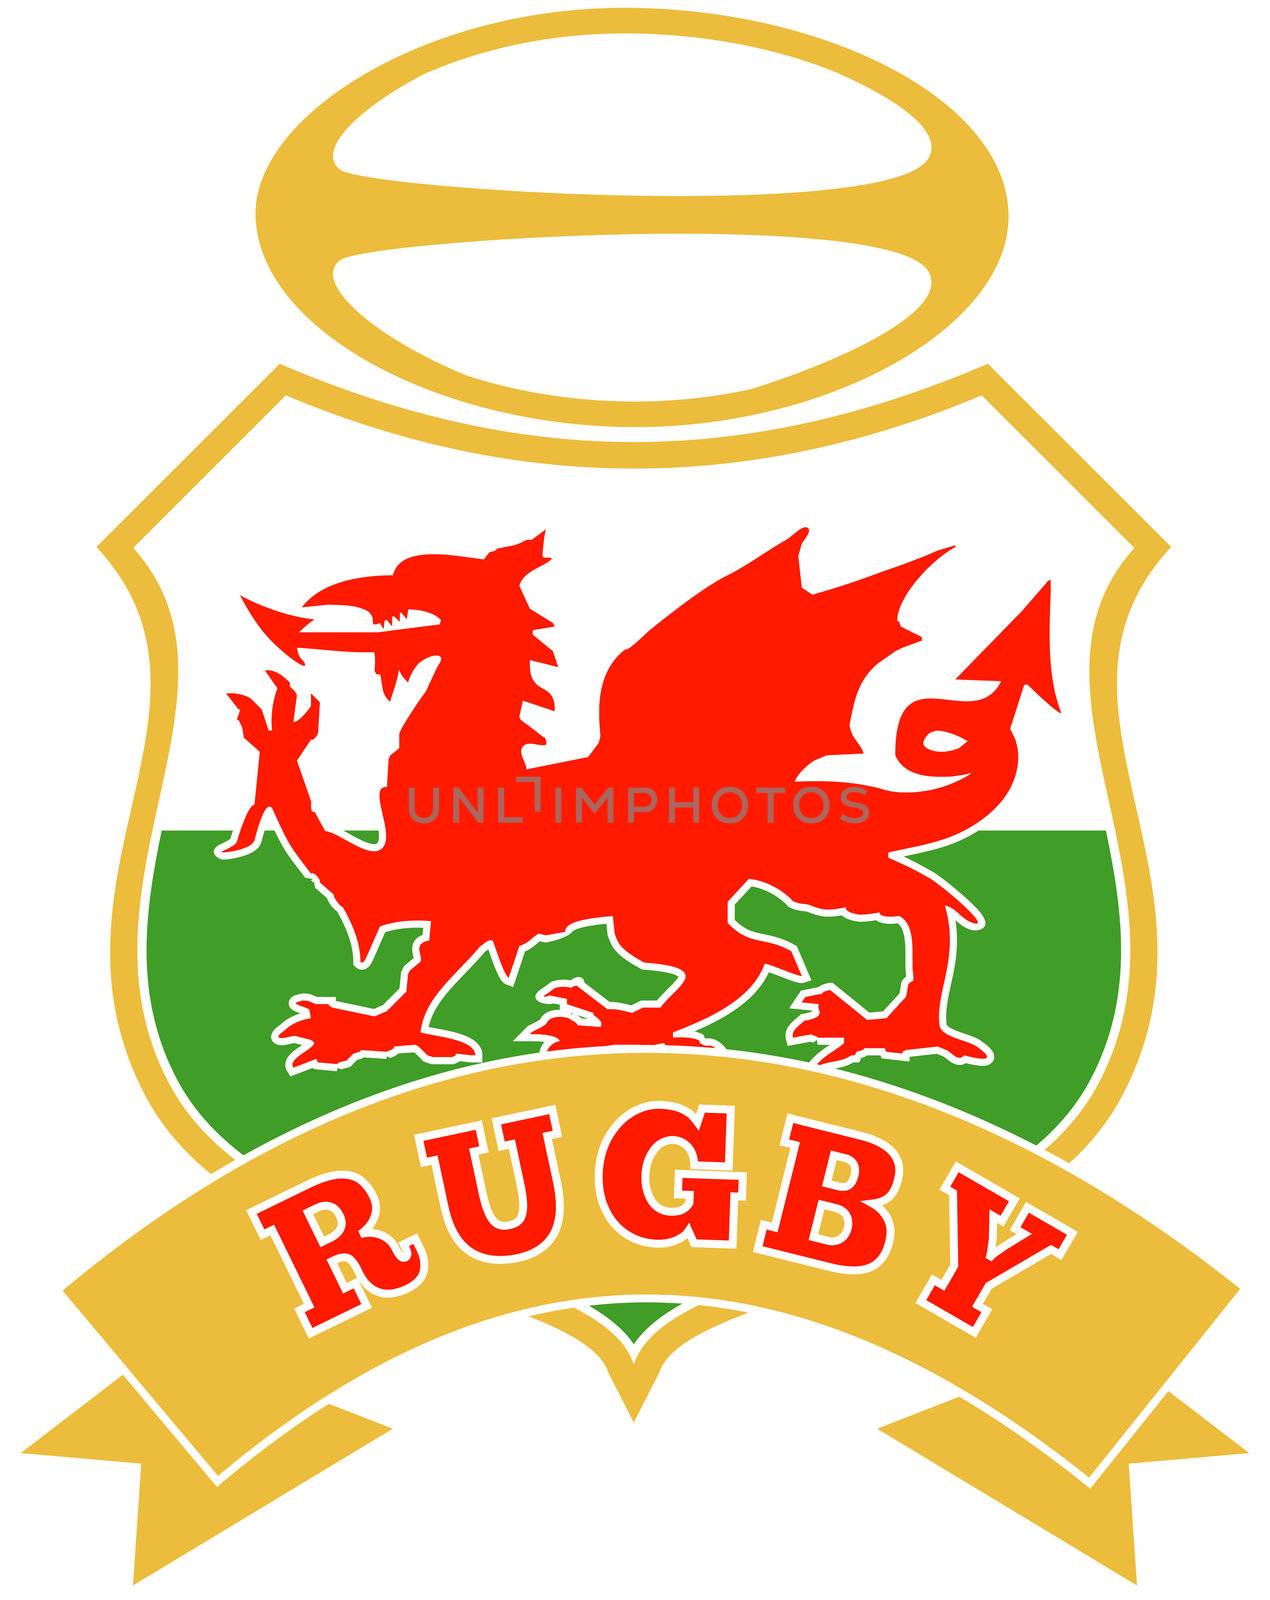 illustration of a red welsh wales dragon with rugby ball in shield on white background